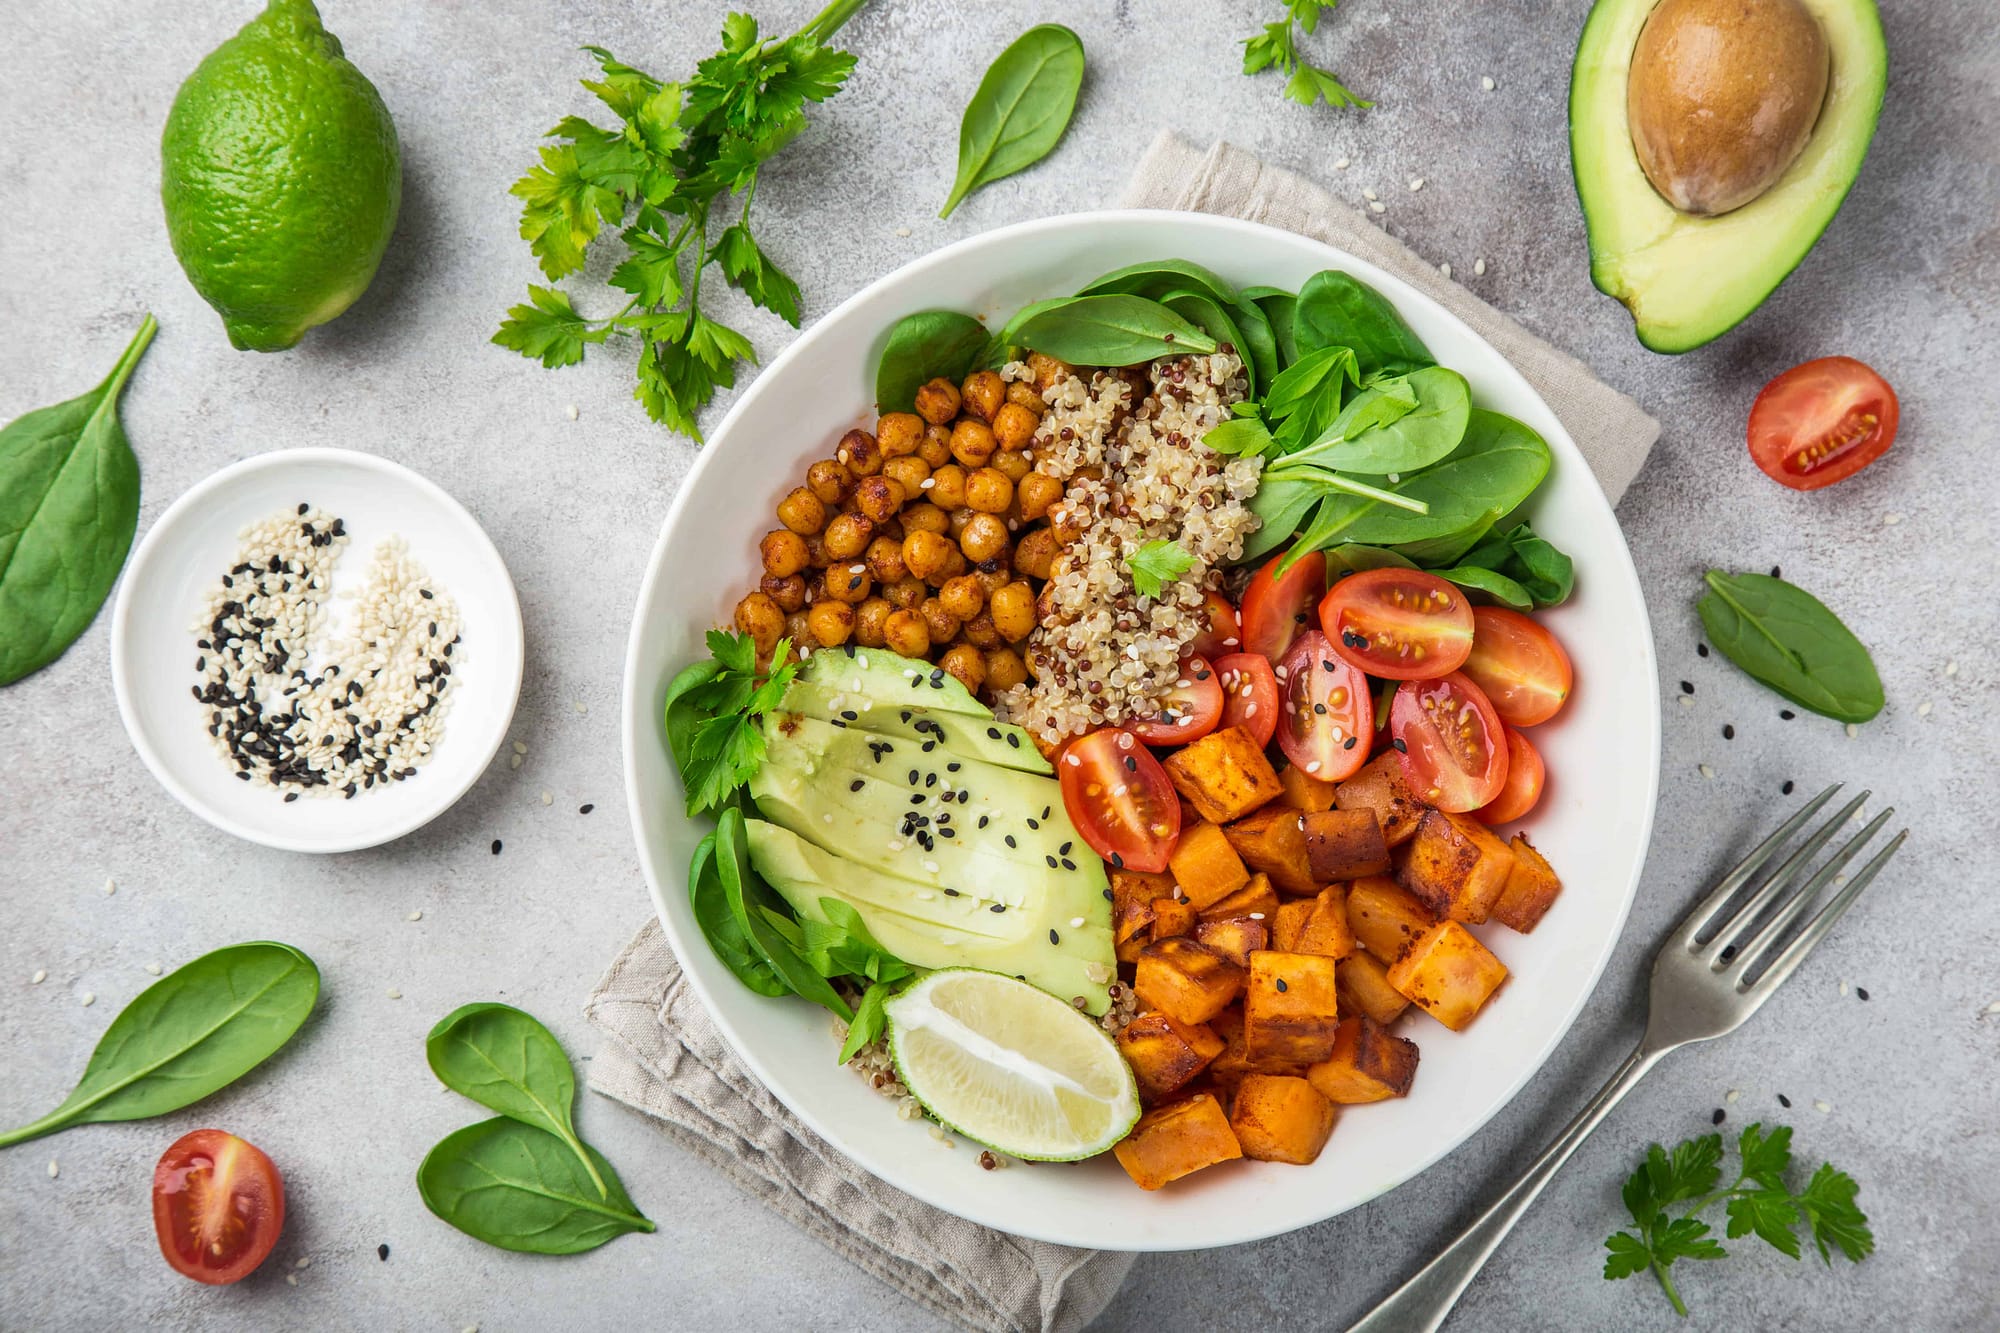 Transitioning to a plant-based diet with a healthy vegetable bowl of avocado, quinoa, sweet potato, tomato, spinach, and chickpeas 